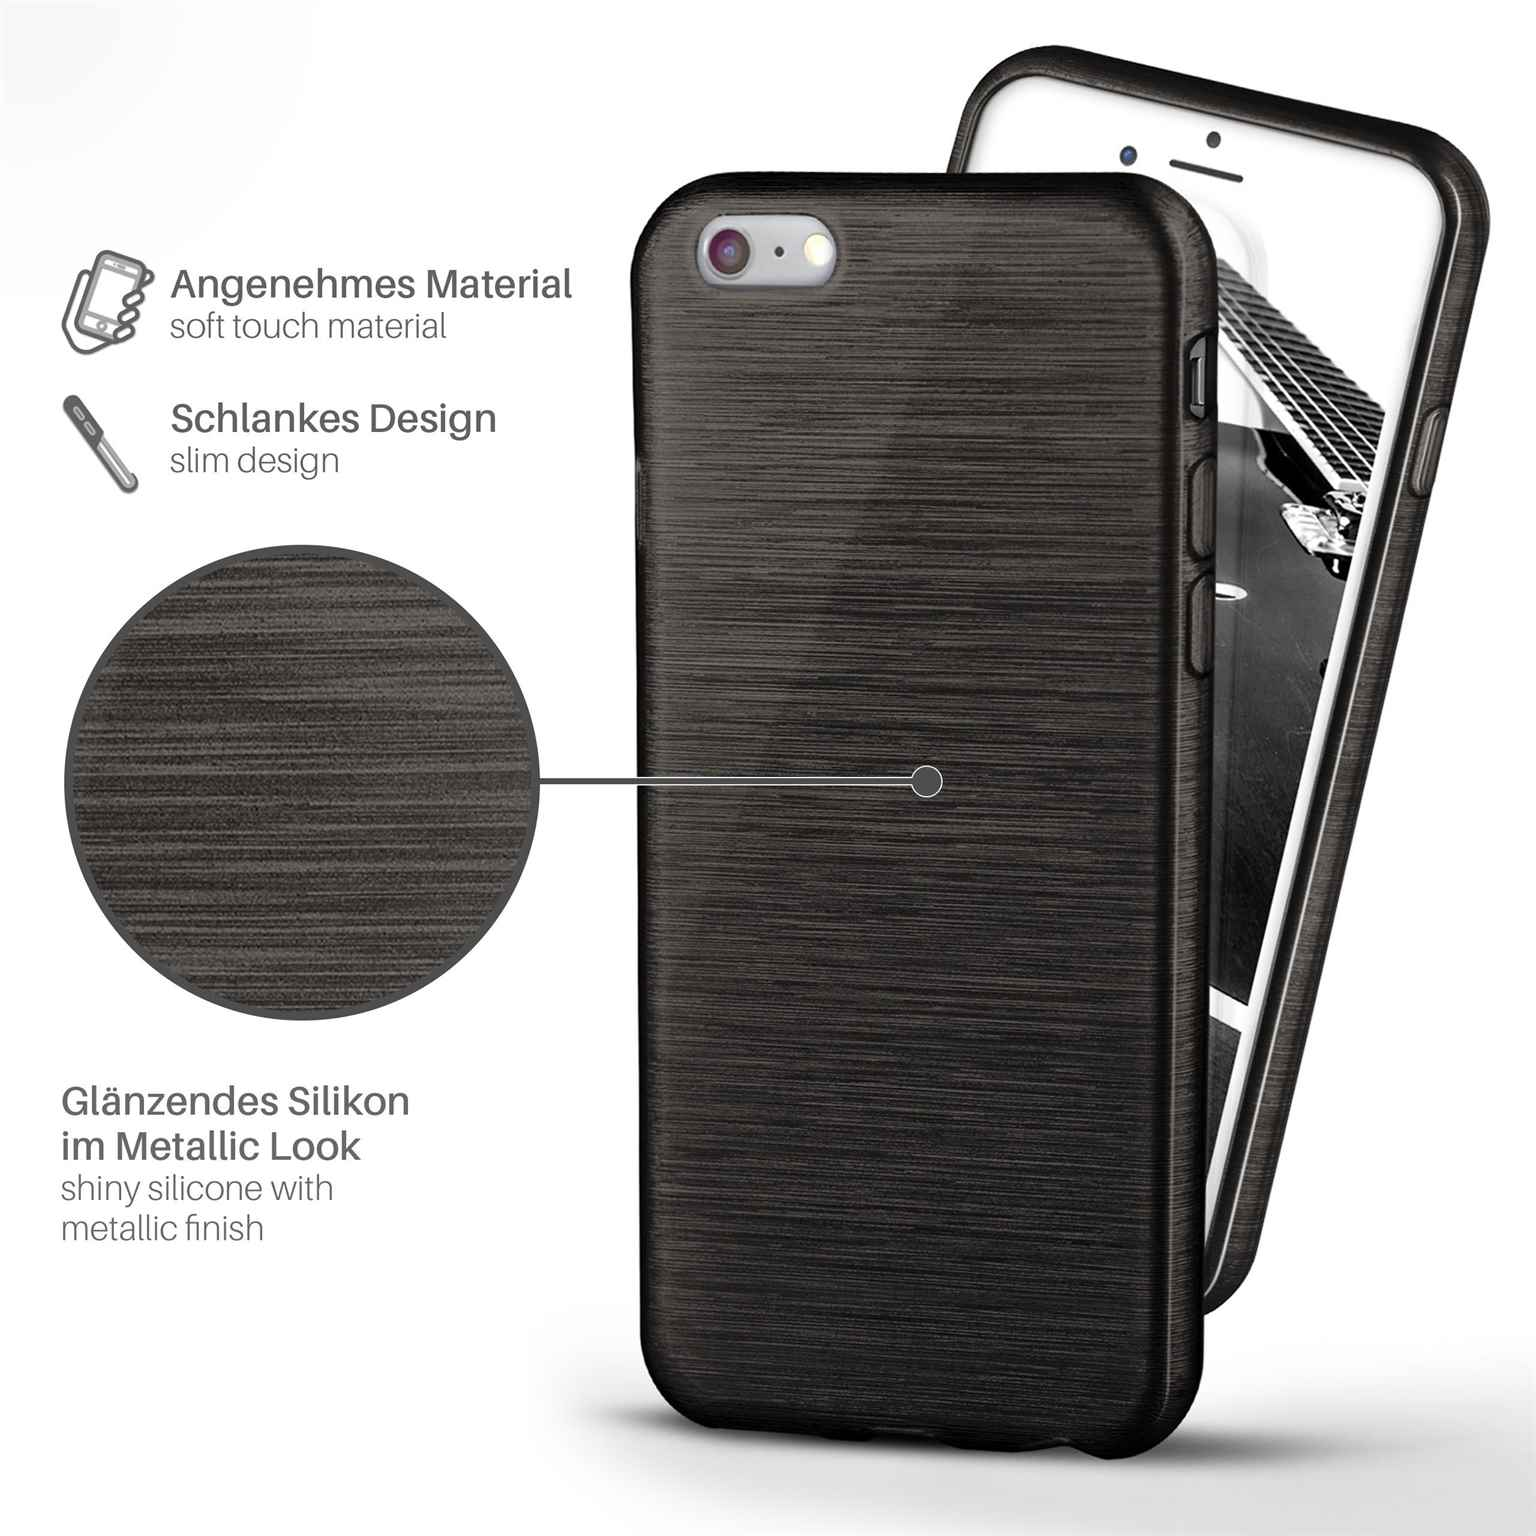 Backcover, iPhone Onyx-Black Brushed 6s, MOEX Apple, Case,